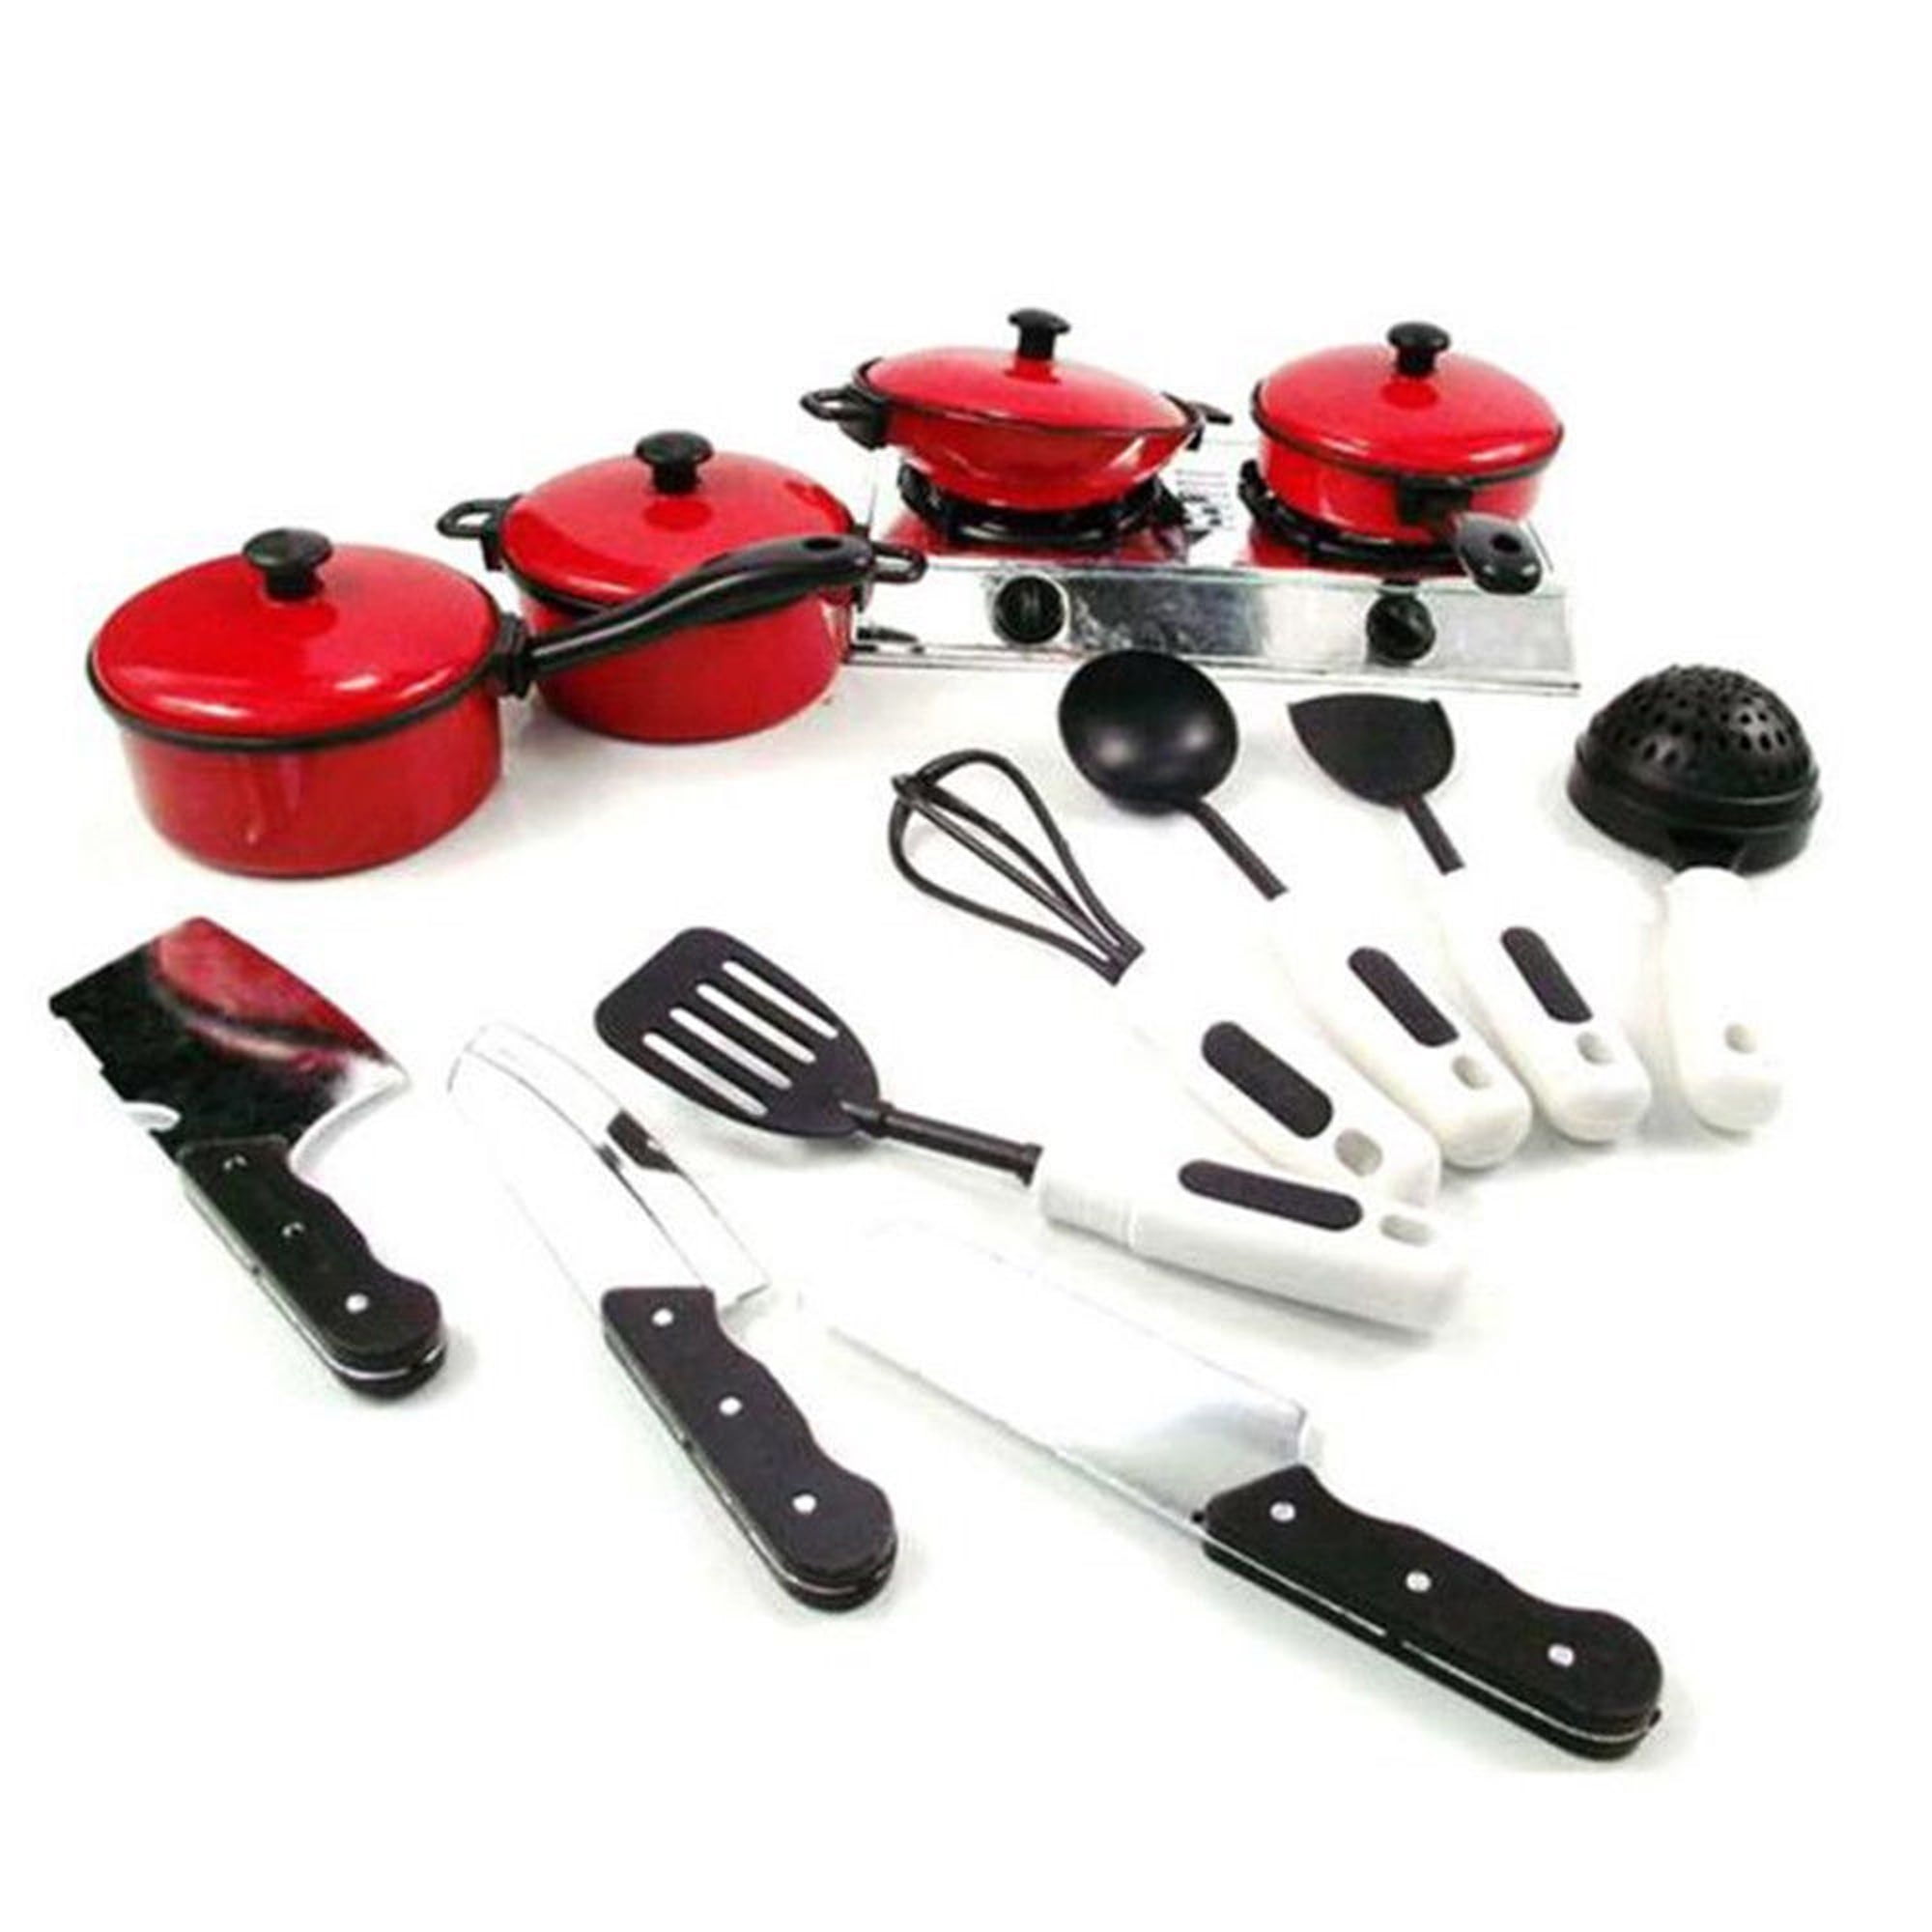 13PCS House Toy Kitchen Utensils Cooking Pots Pans Food Dishes Cookware Kid Play 